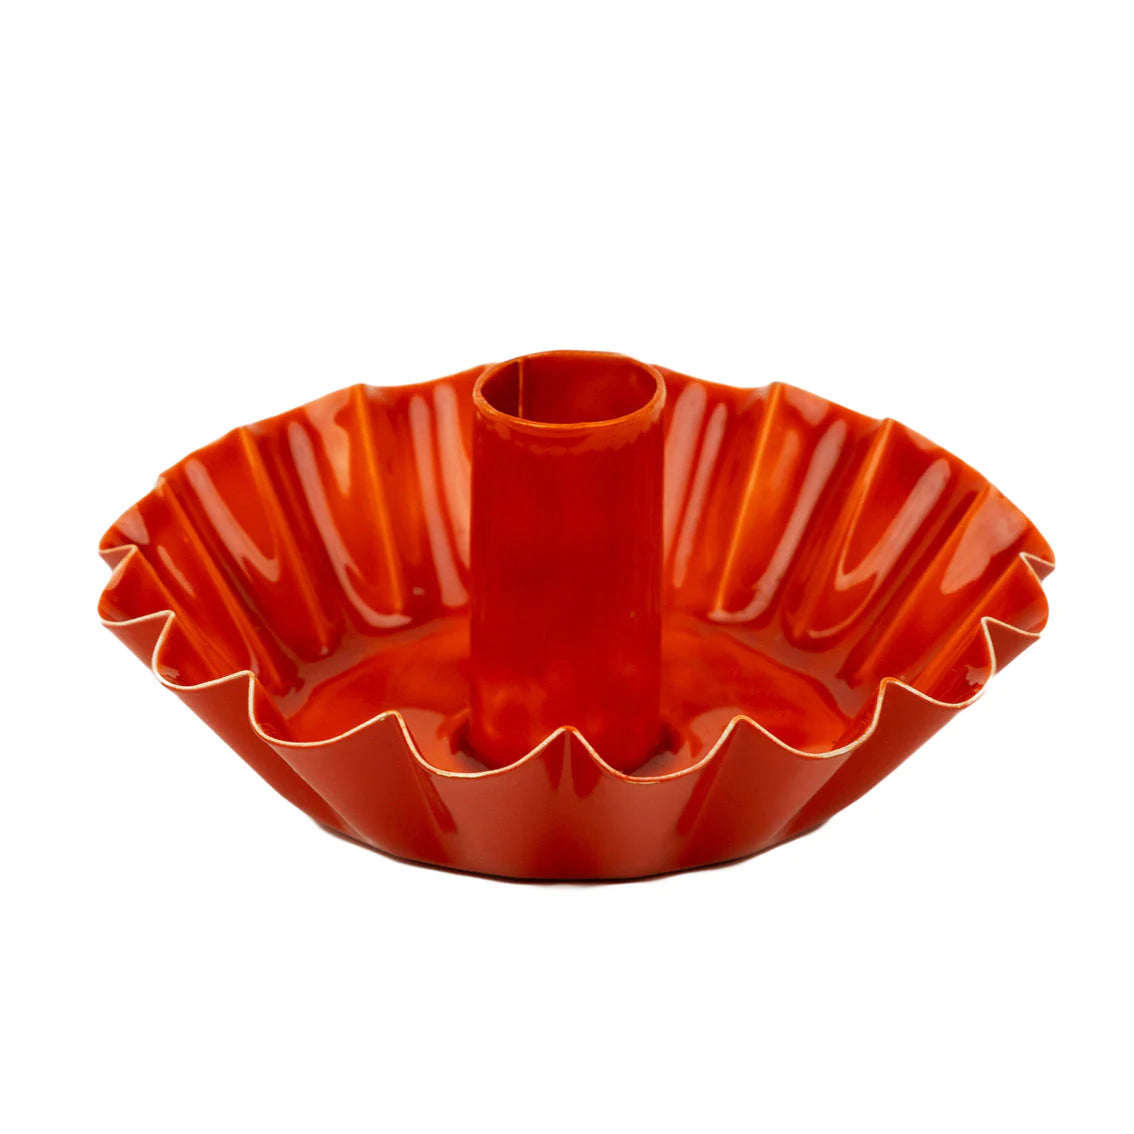 Scalloped Edge Enamel Candle Holder | 3 Colours Available